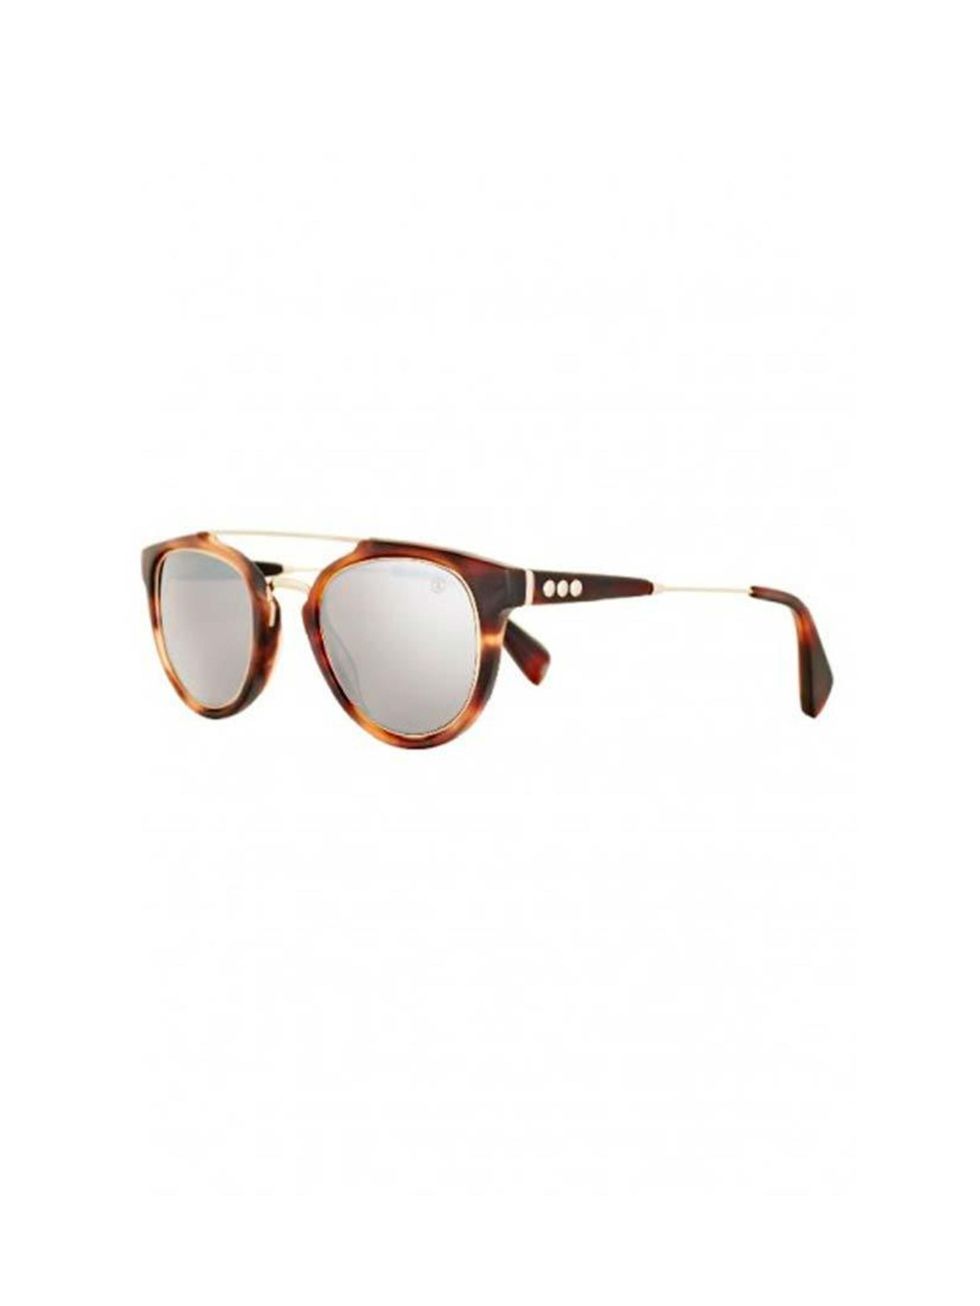 <p>If only we had the chance to wear them...</p>

<p>Taylor Morris sunglasses, £159 at <a href="http://www.beachcafe.com/new-in/rollright-sunglasses-brown.html" target="_blank">Beach Cafe</a></p>